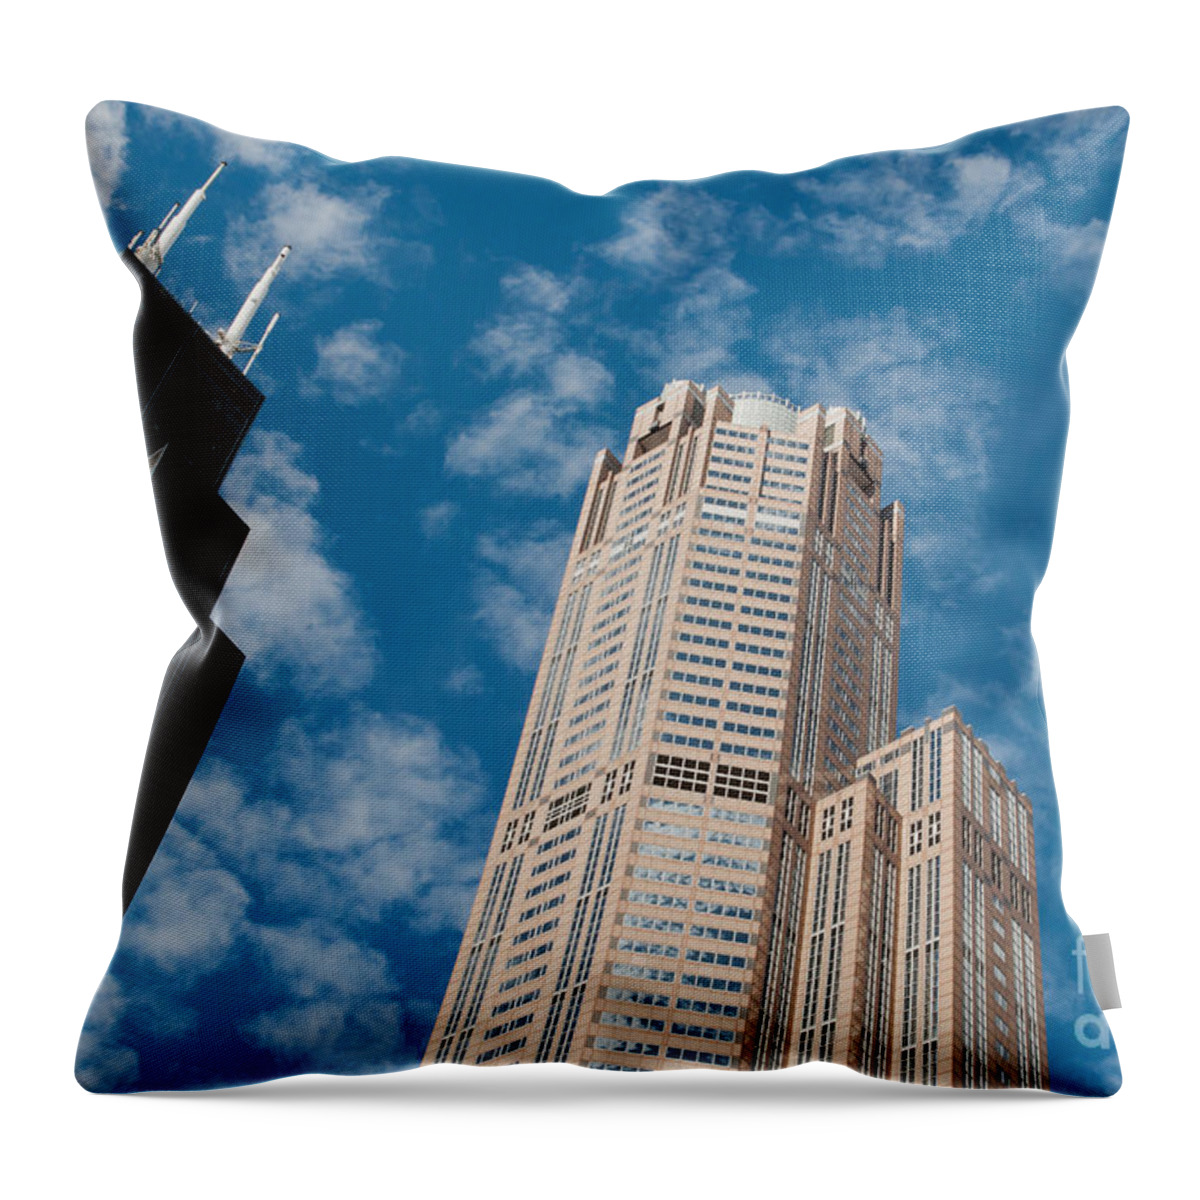 Chicago Downtown Throw Pillow featuring the photograph Willis Tower by Dejan Jovanovic